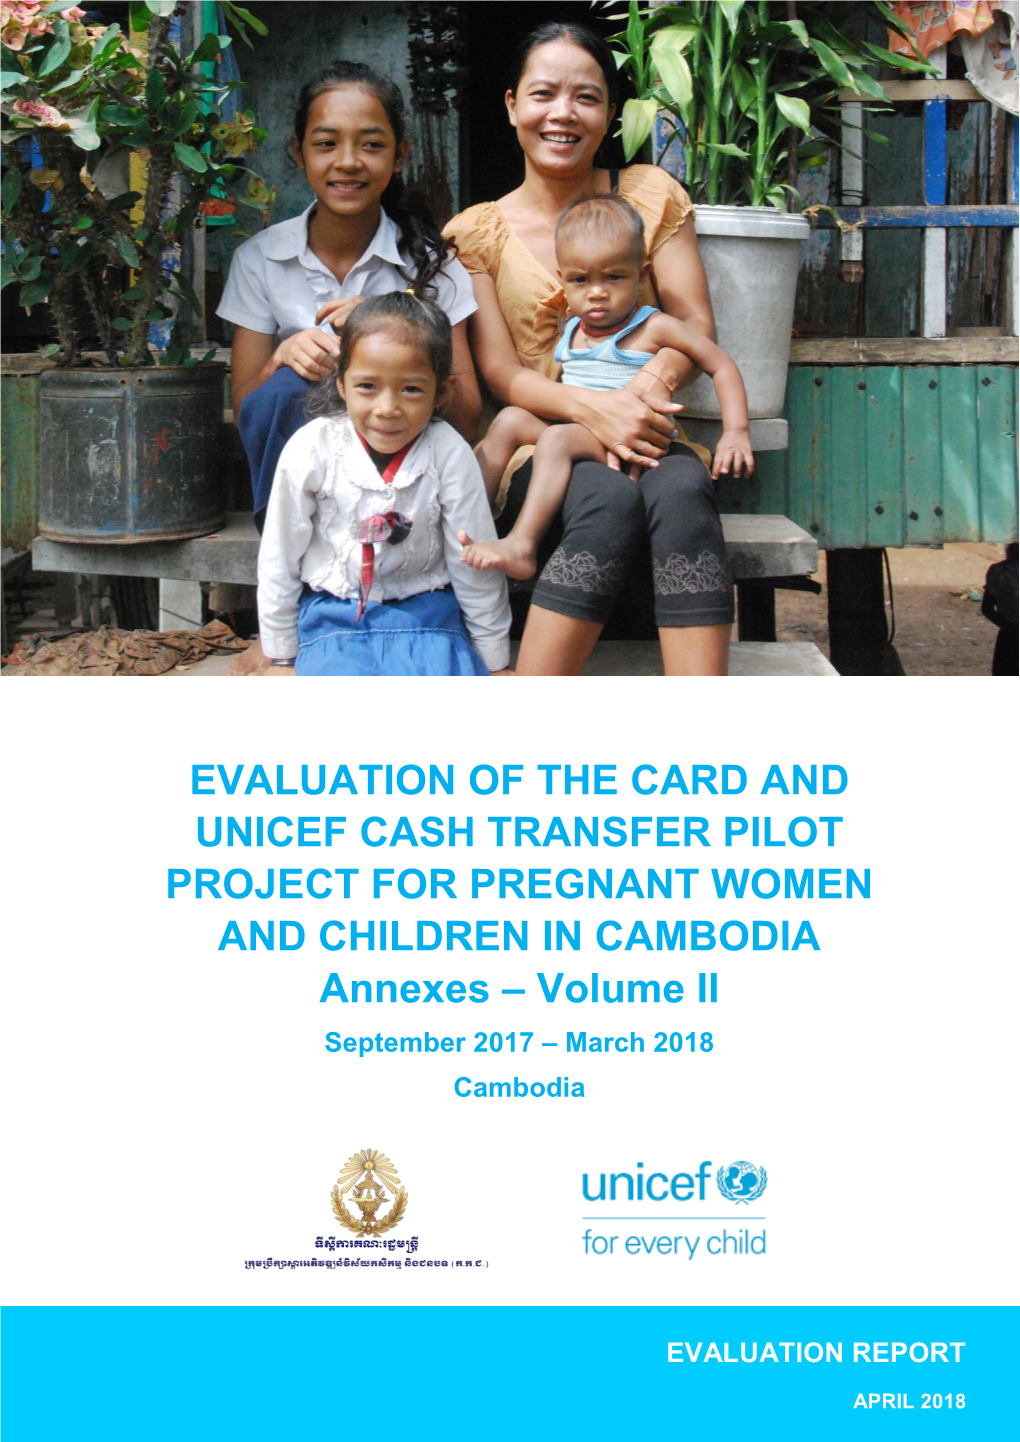 EVALUATION of the CARD and UNICEF CASH TRANSFER PILOT PROJECT for PREGNANT WOMEN and CHILDREN in CAMBODIA: Annexes (Volume II)